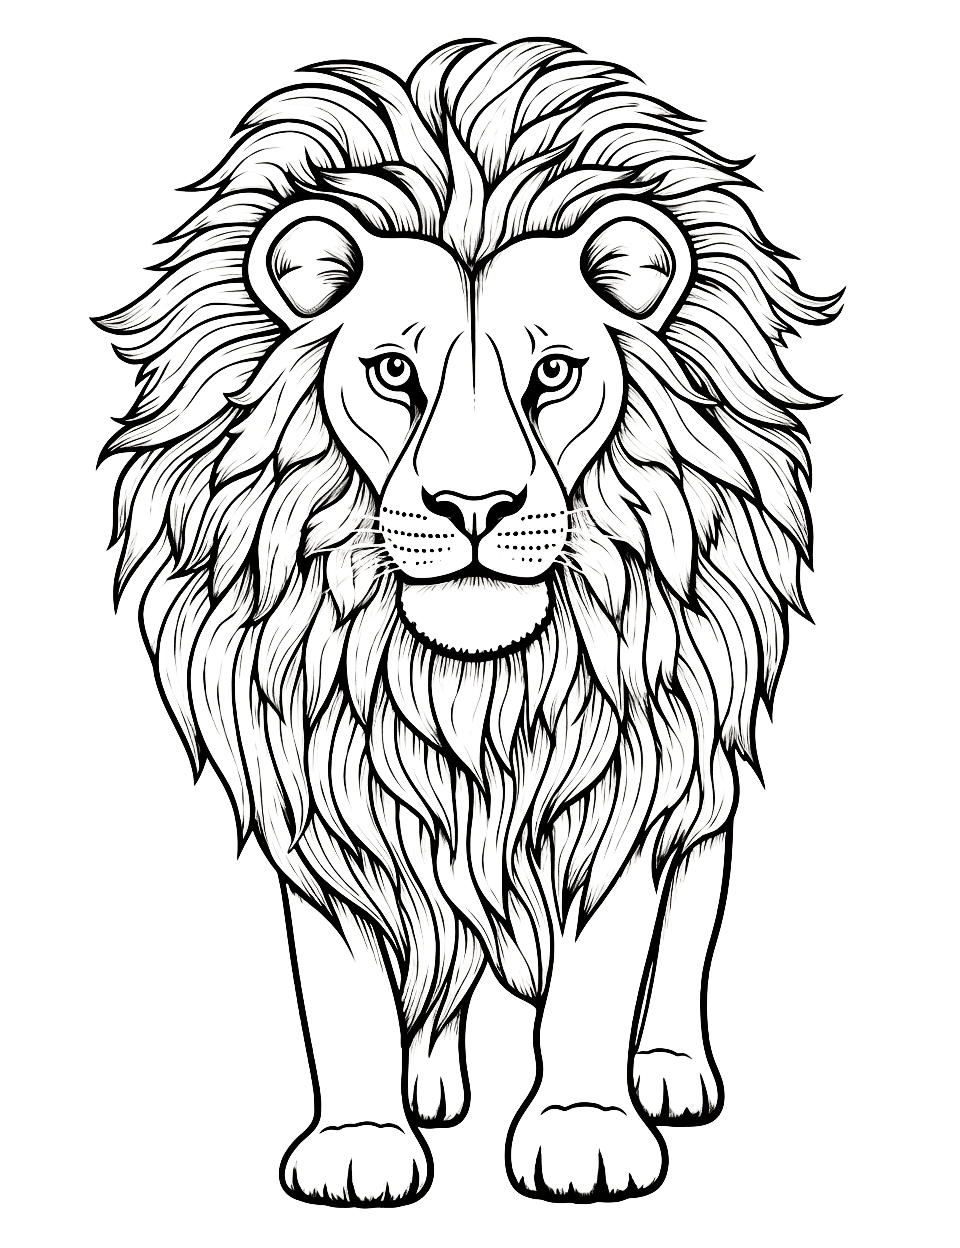 Realistic Lion Animal Coloring Page - A majestic lion with a flowing mane in its natural habitat.